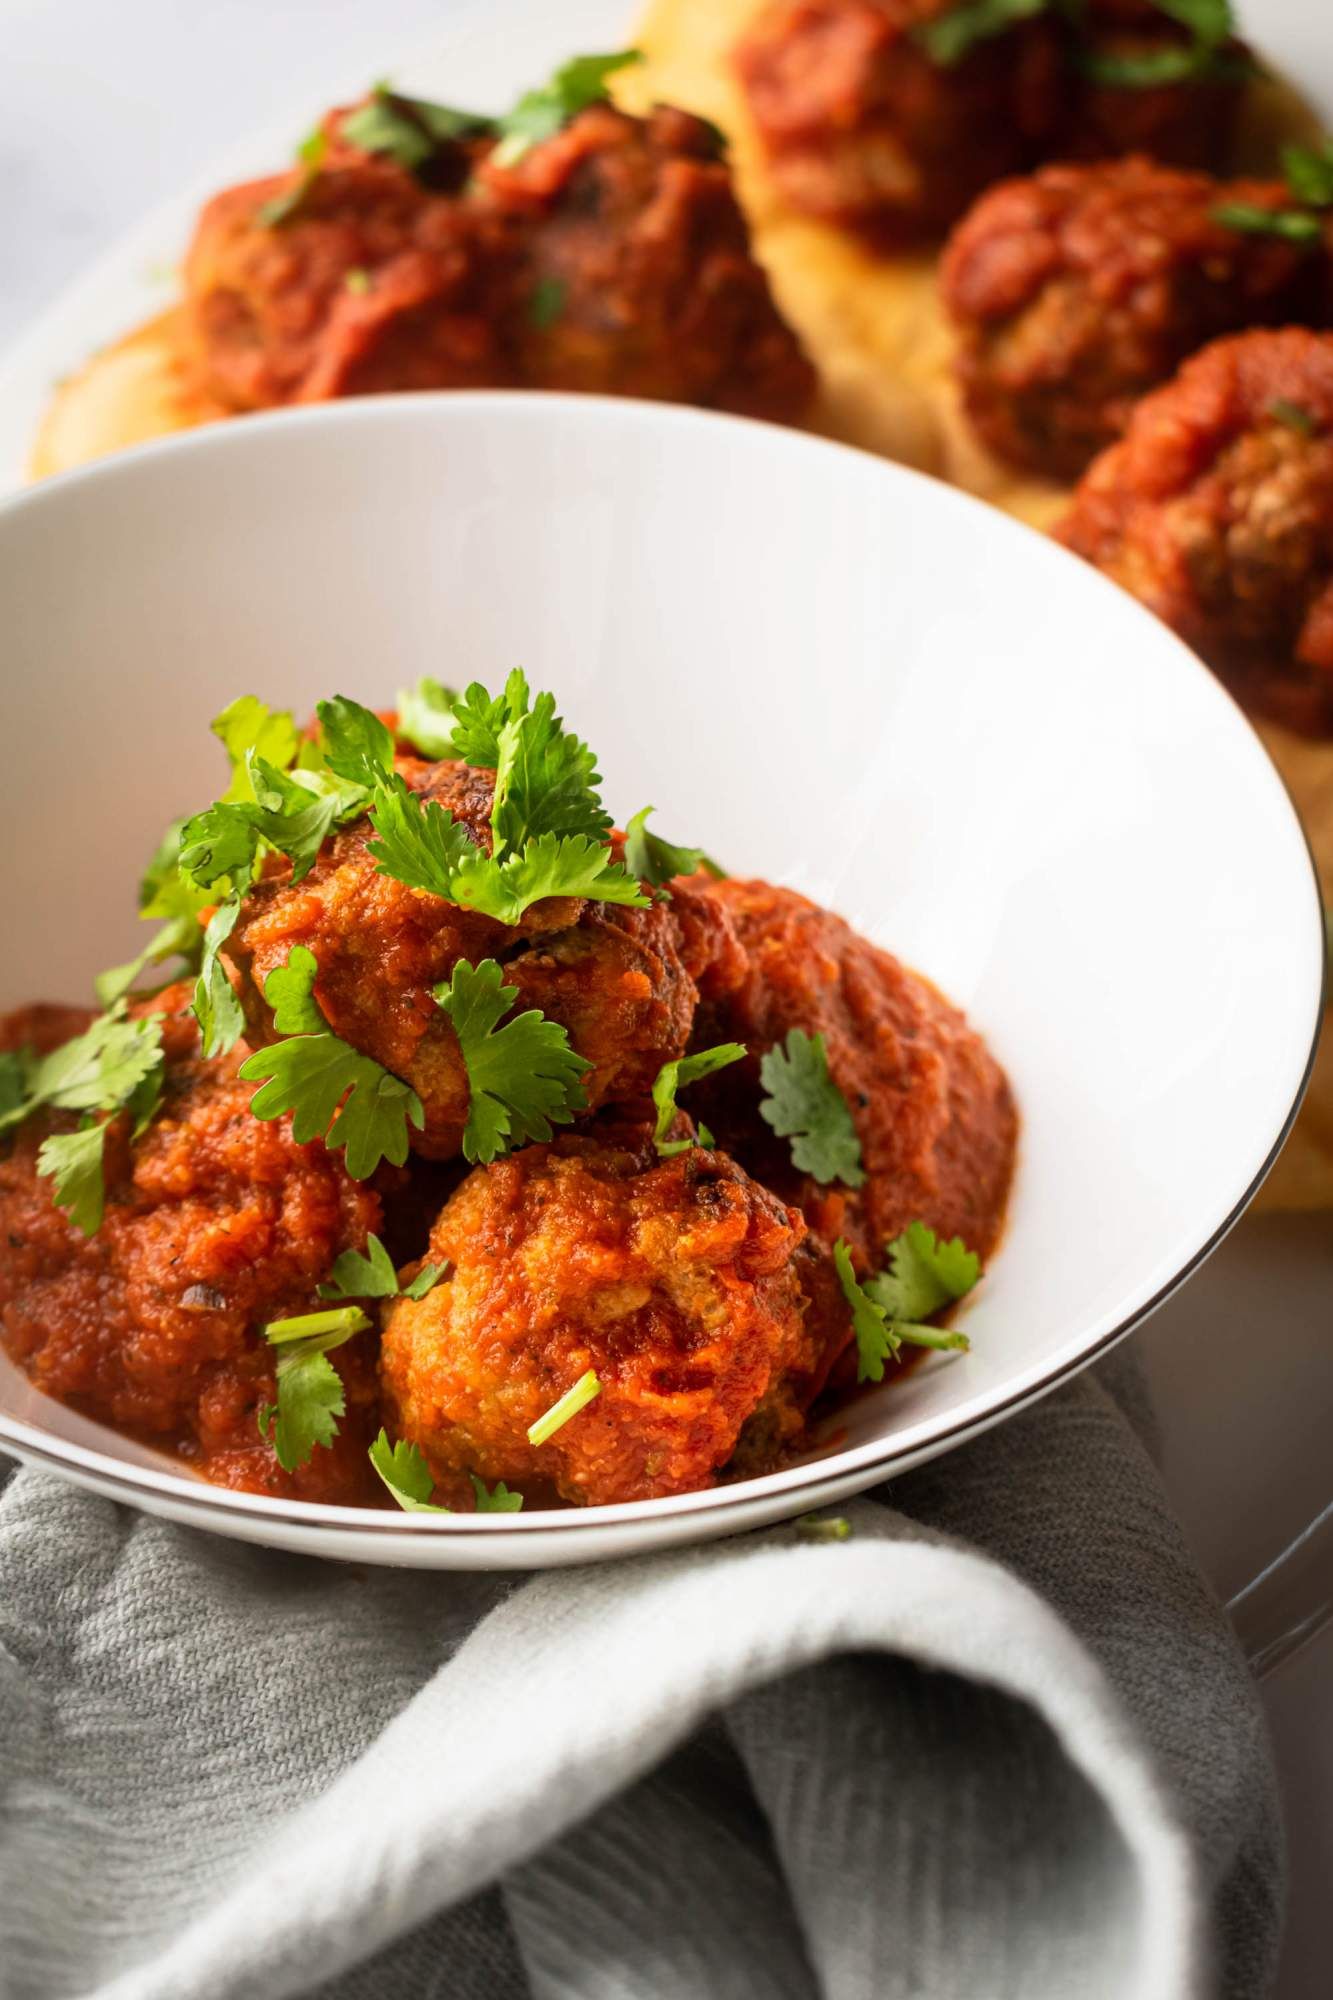 Mexican meatballs simmered in a tomato chipotle sauce in a bowl with cilantro leaves.